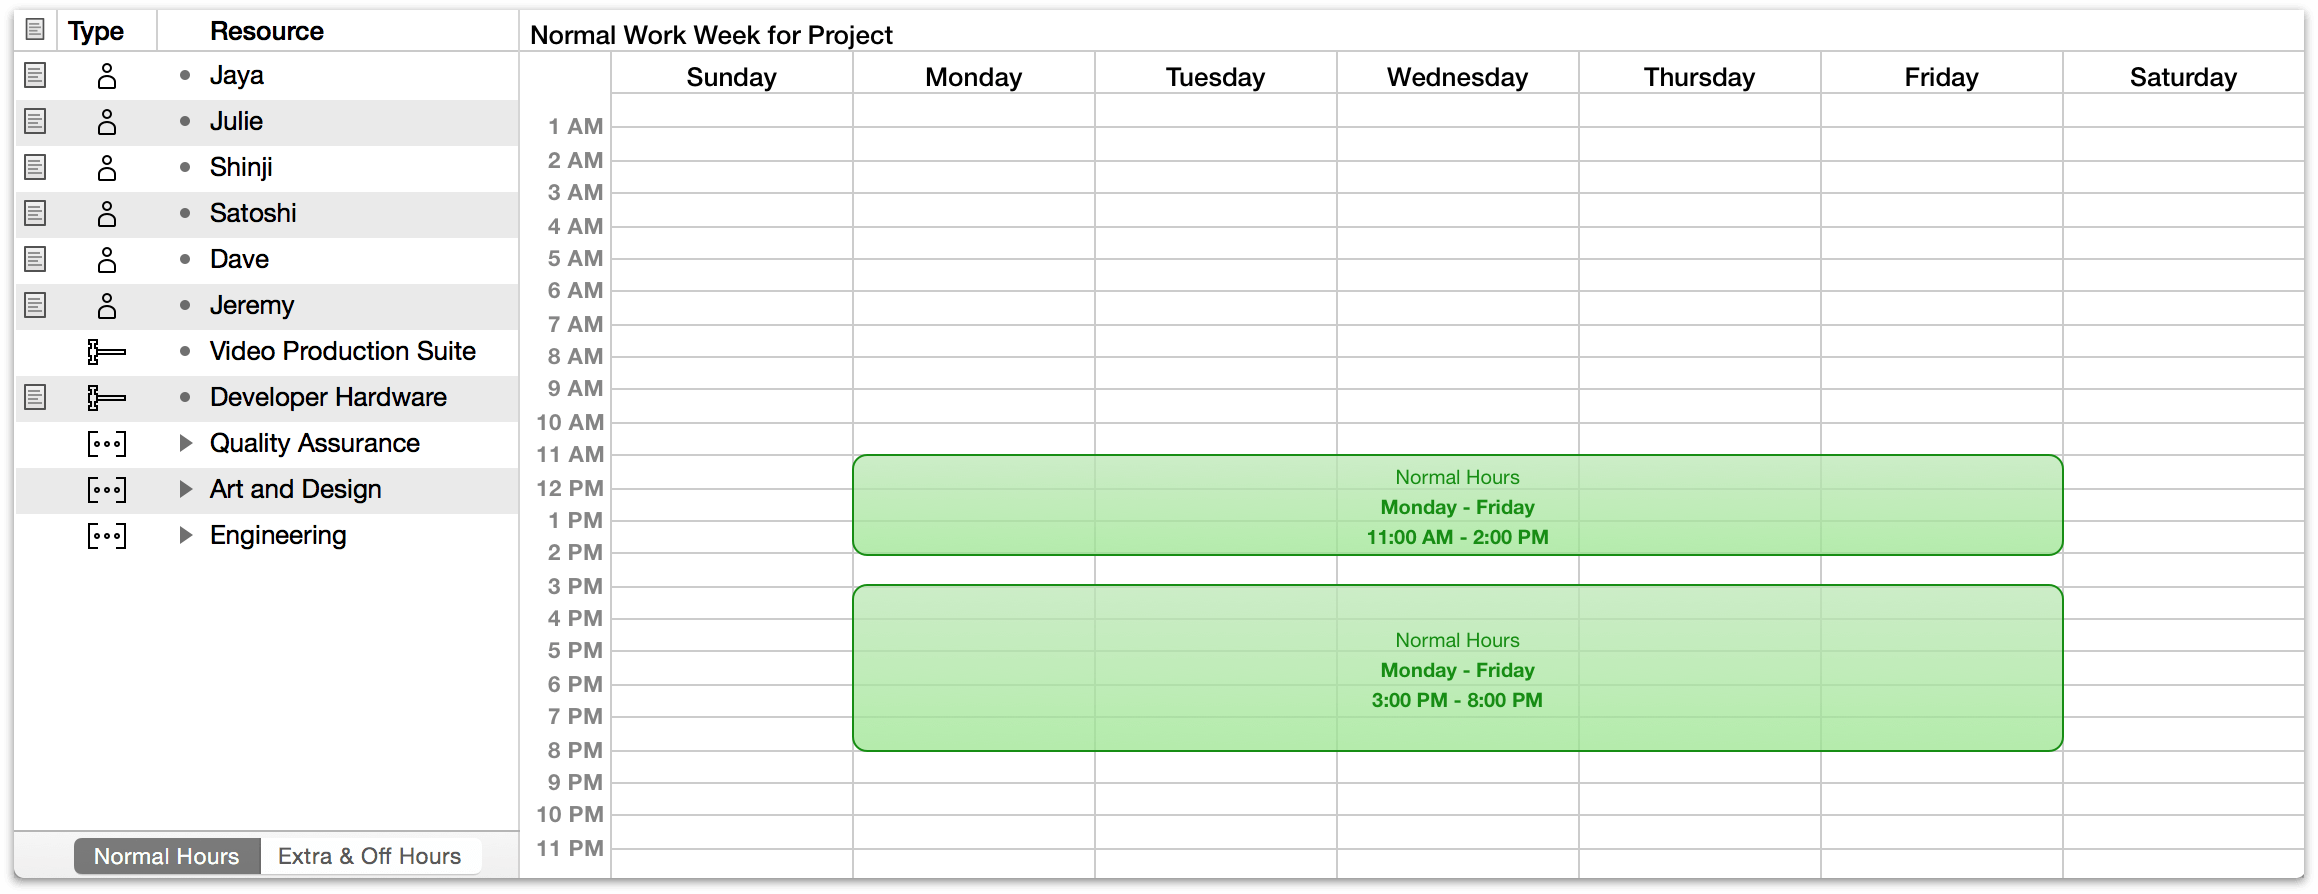 The normal work week for the whole project, as shown in calendar view.